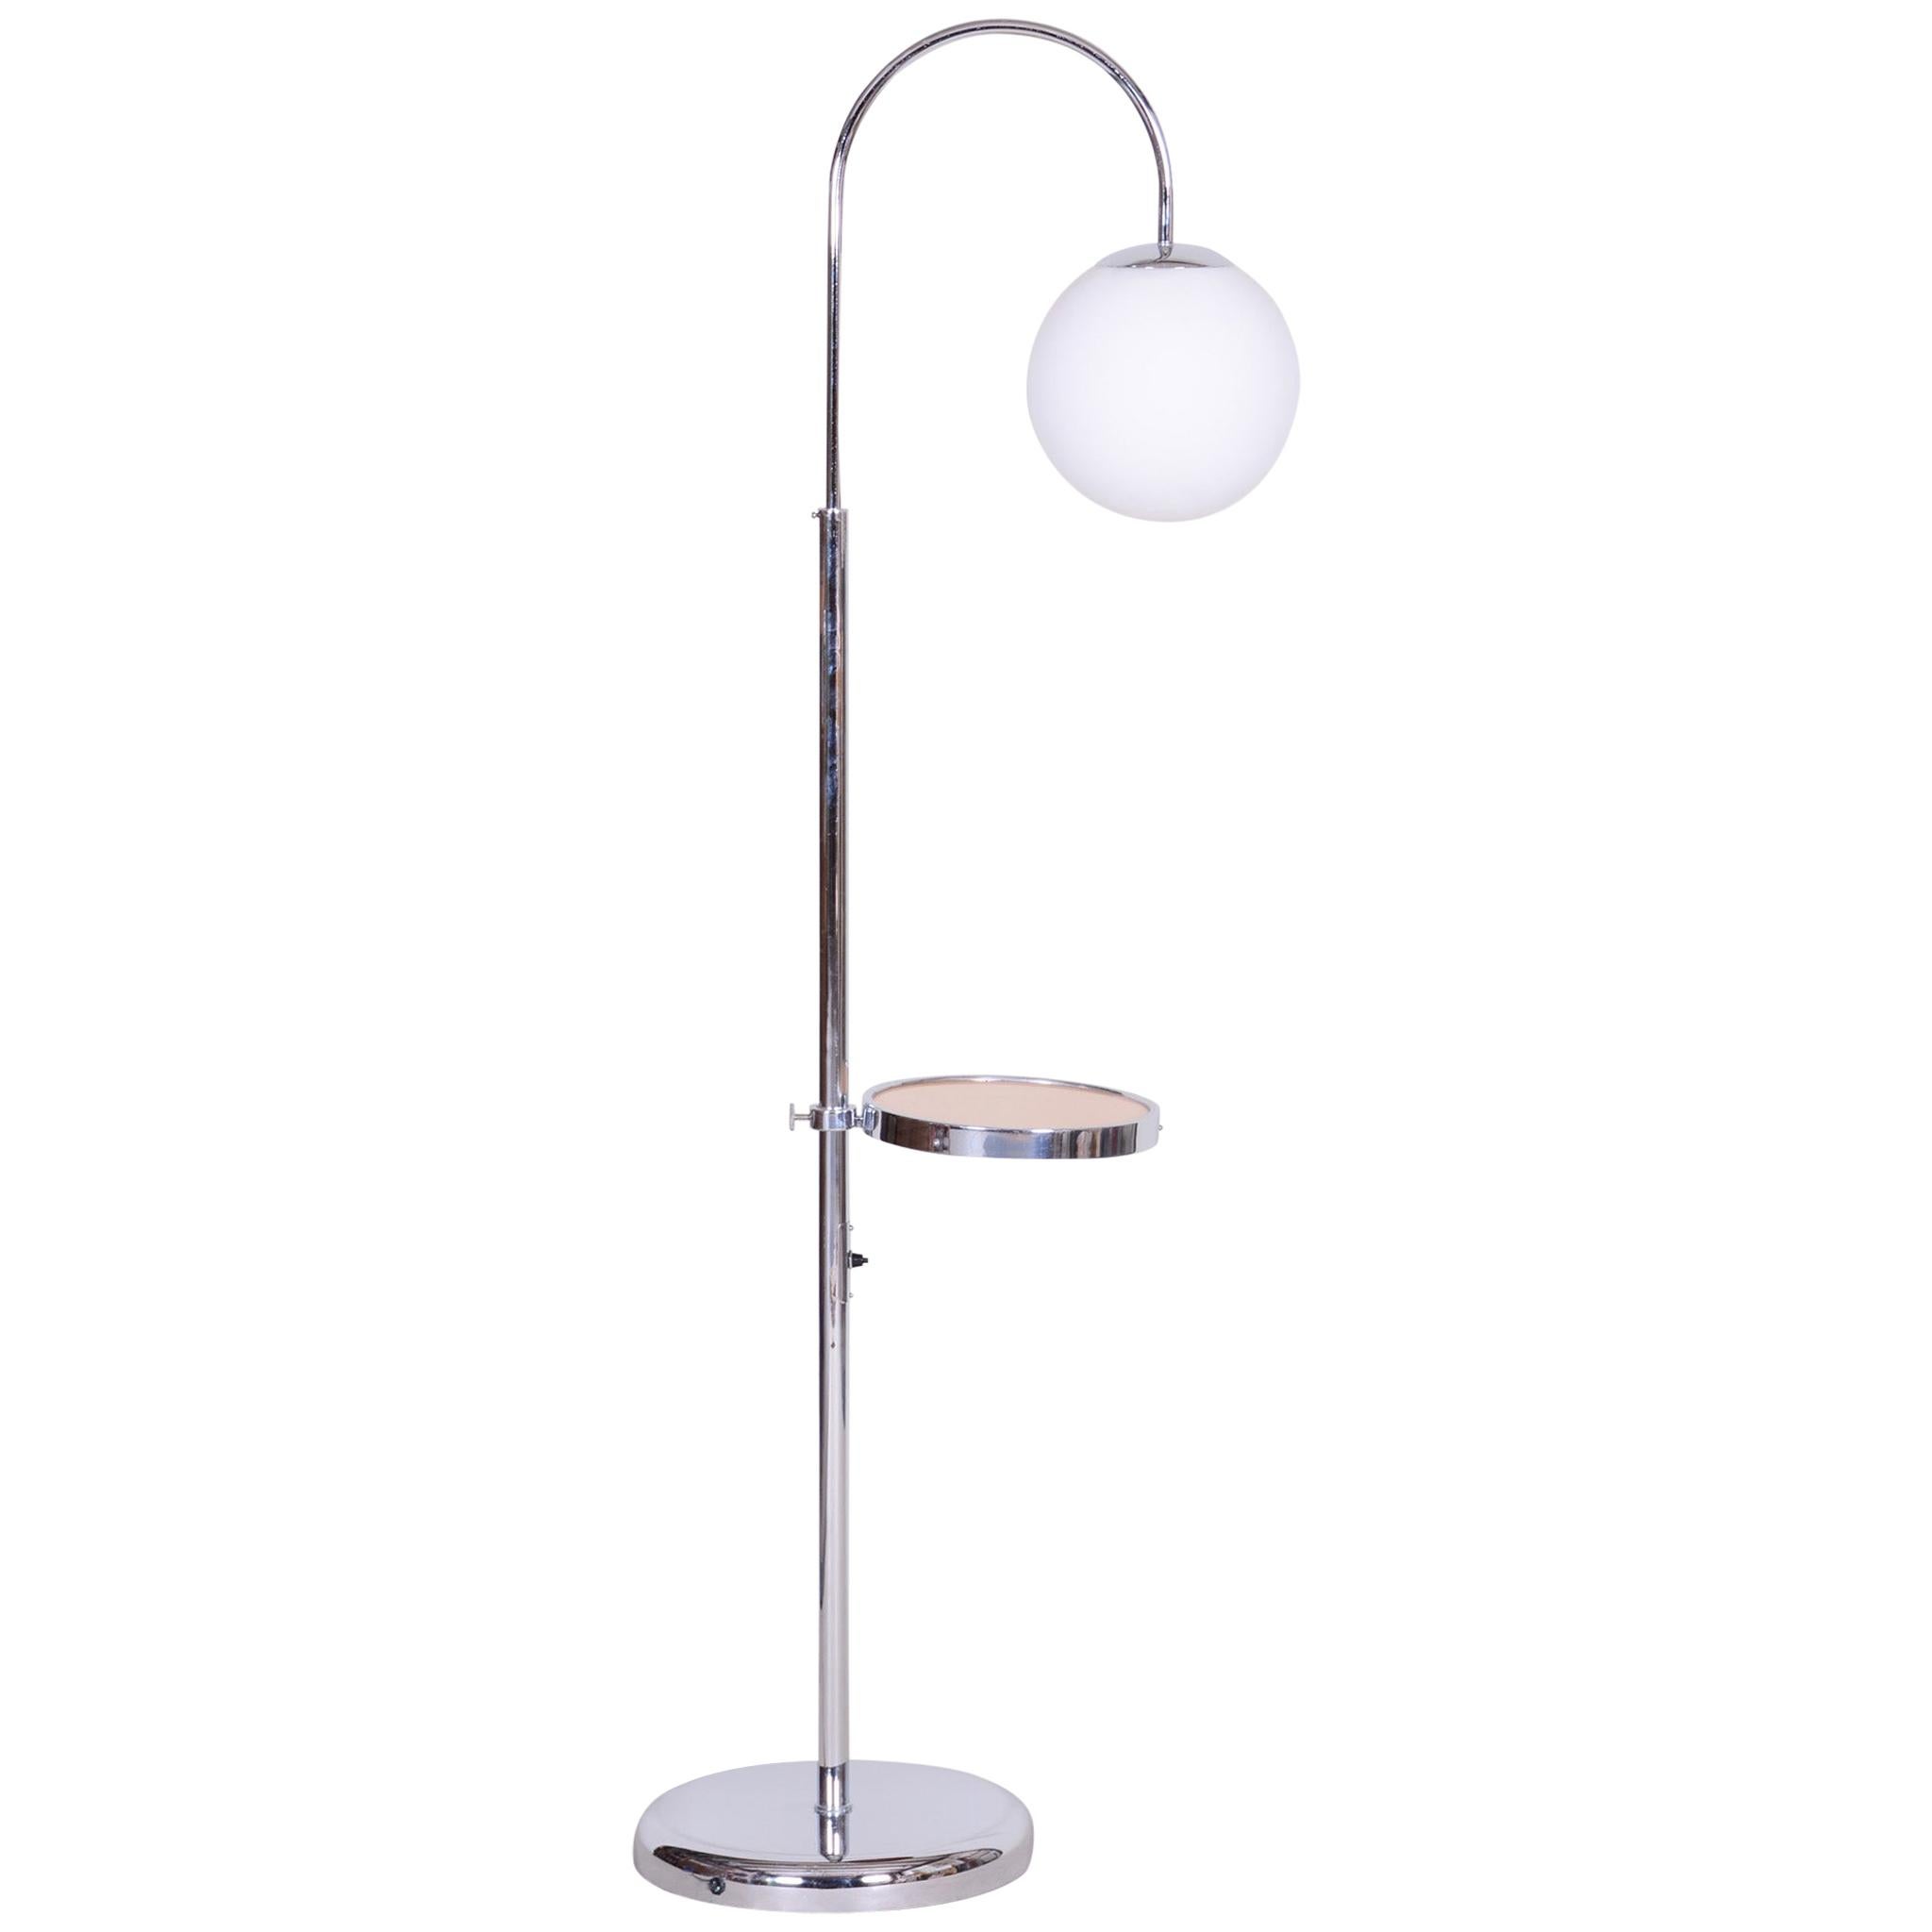 Early 20th Century Chrome Floor Lamp, Milk Glass, New Electrification, 1930s For Sale